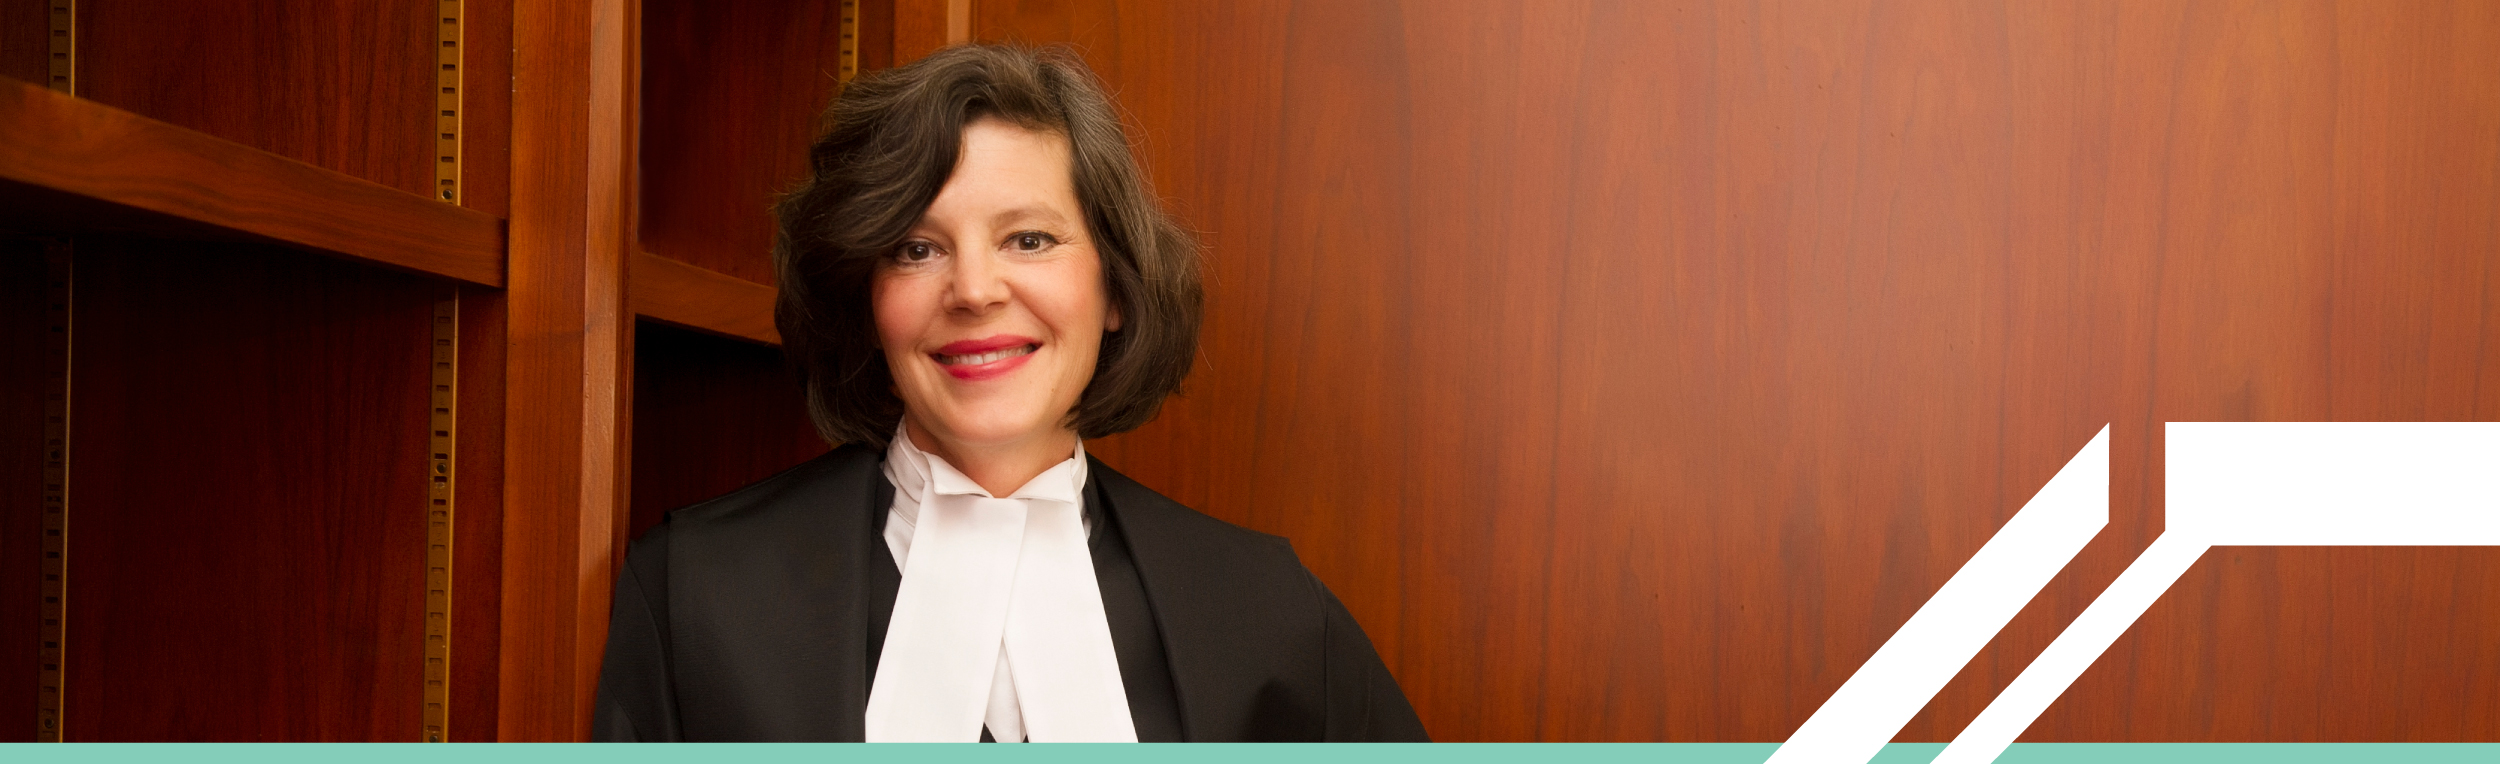 A white woman with wavy brown hair, smiling, wearing judge’s robes